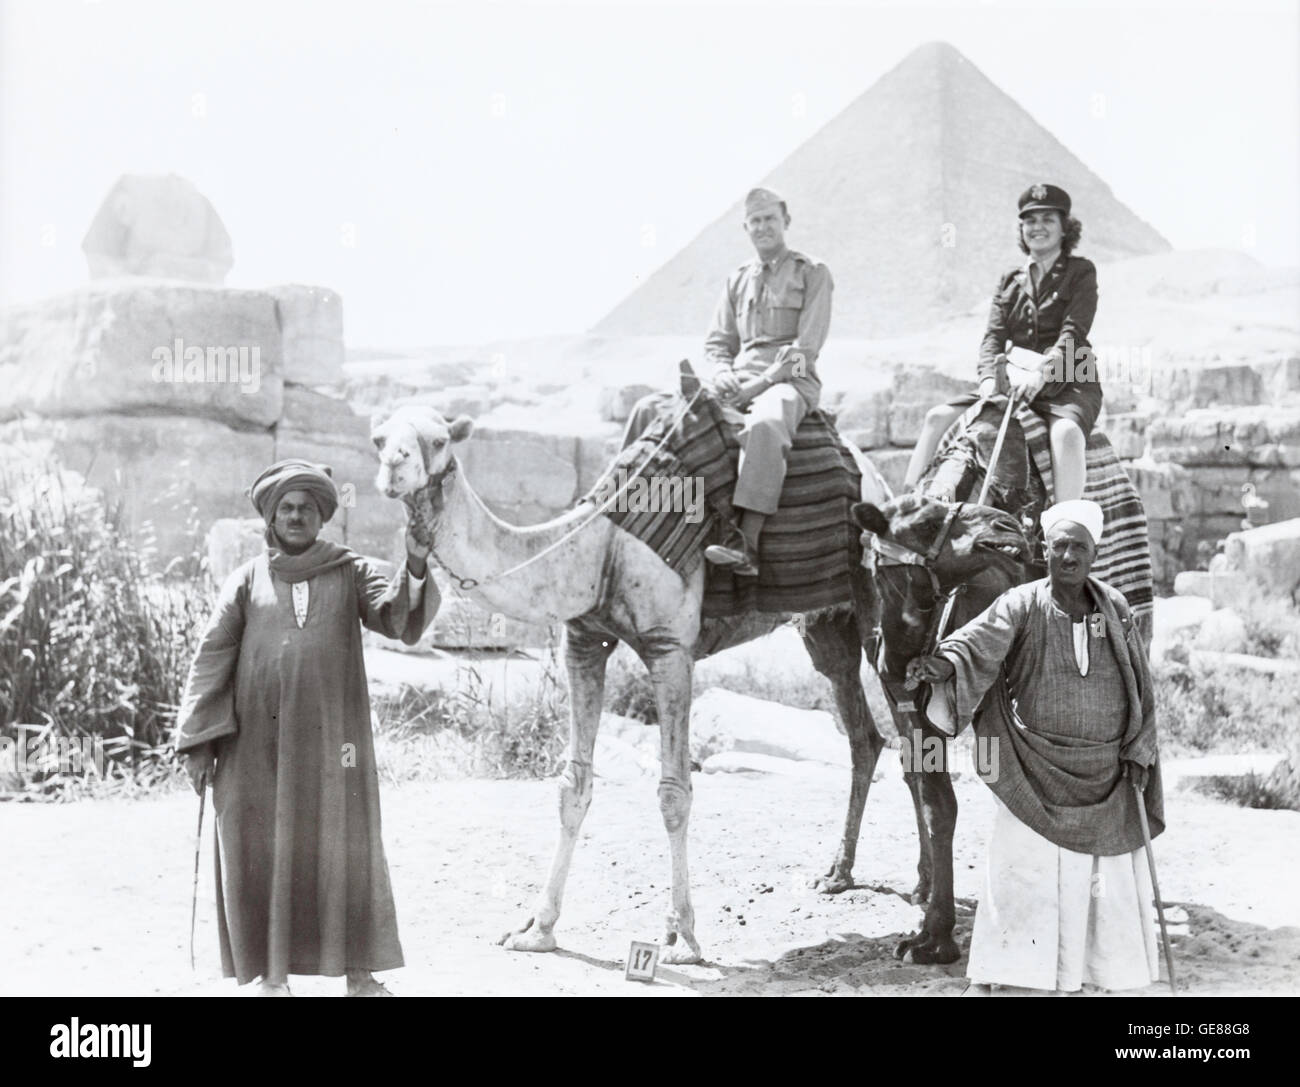 Army Officer  and Womans Army officer(WAC) on Camels , Great Pyramids  Vintage Photograph near Camp Huckstep, Egypt, World War Two, 1944 Stock Photo